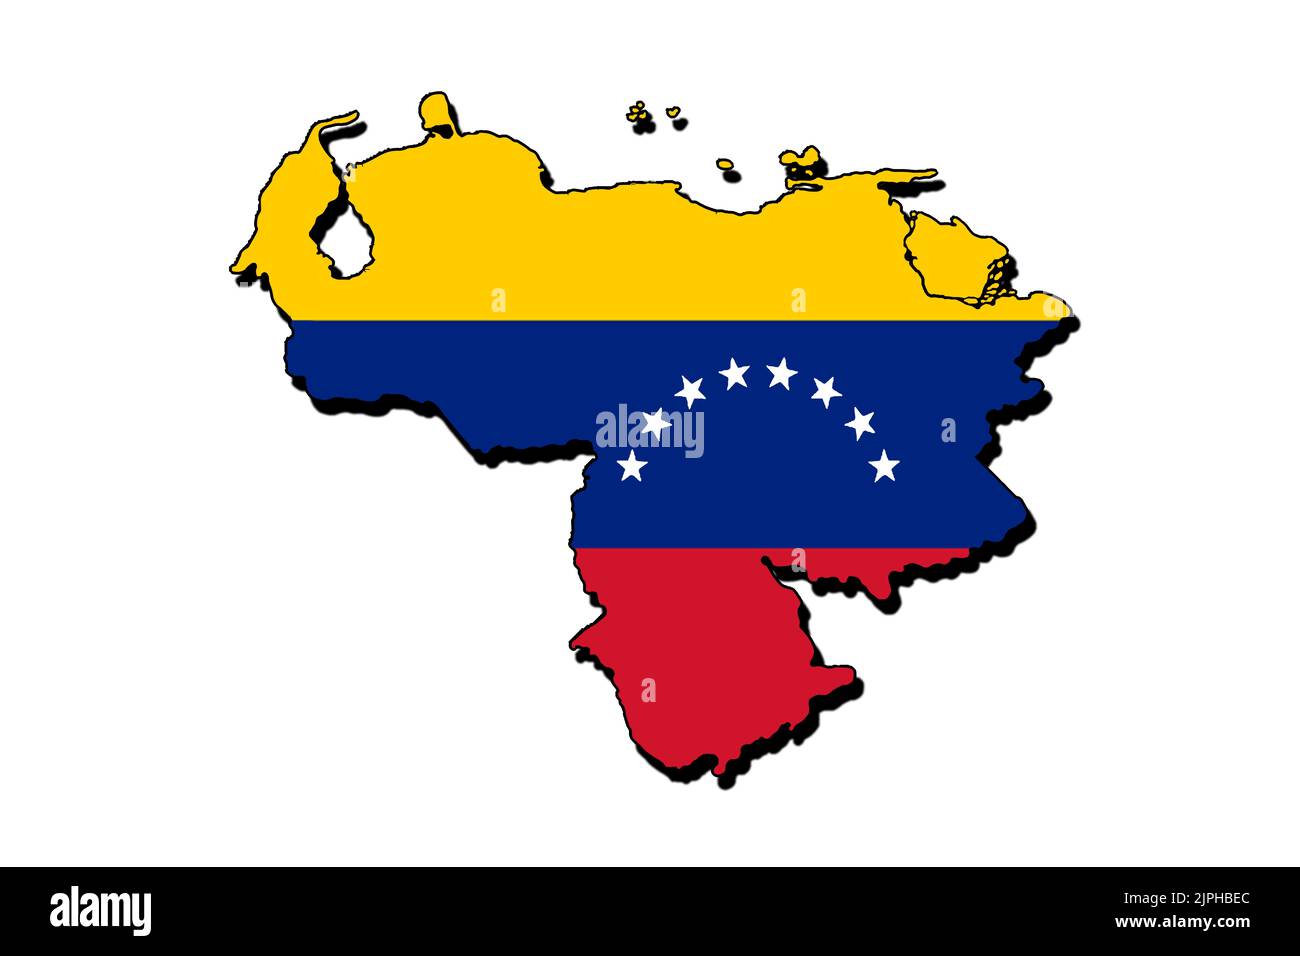 Silhouette of the map of Venezuela with its flag Stock Photo